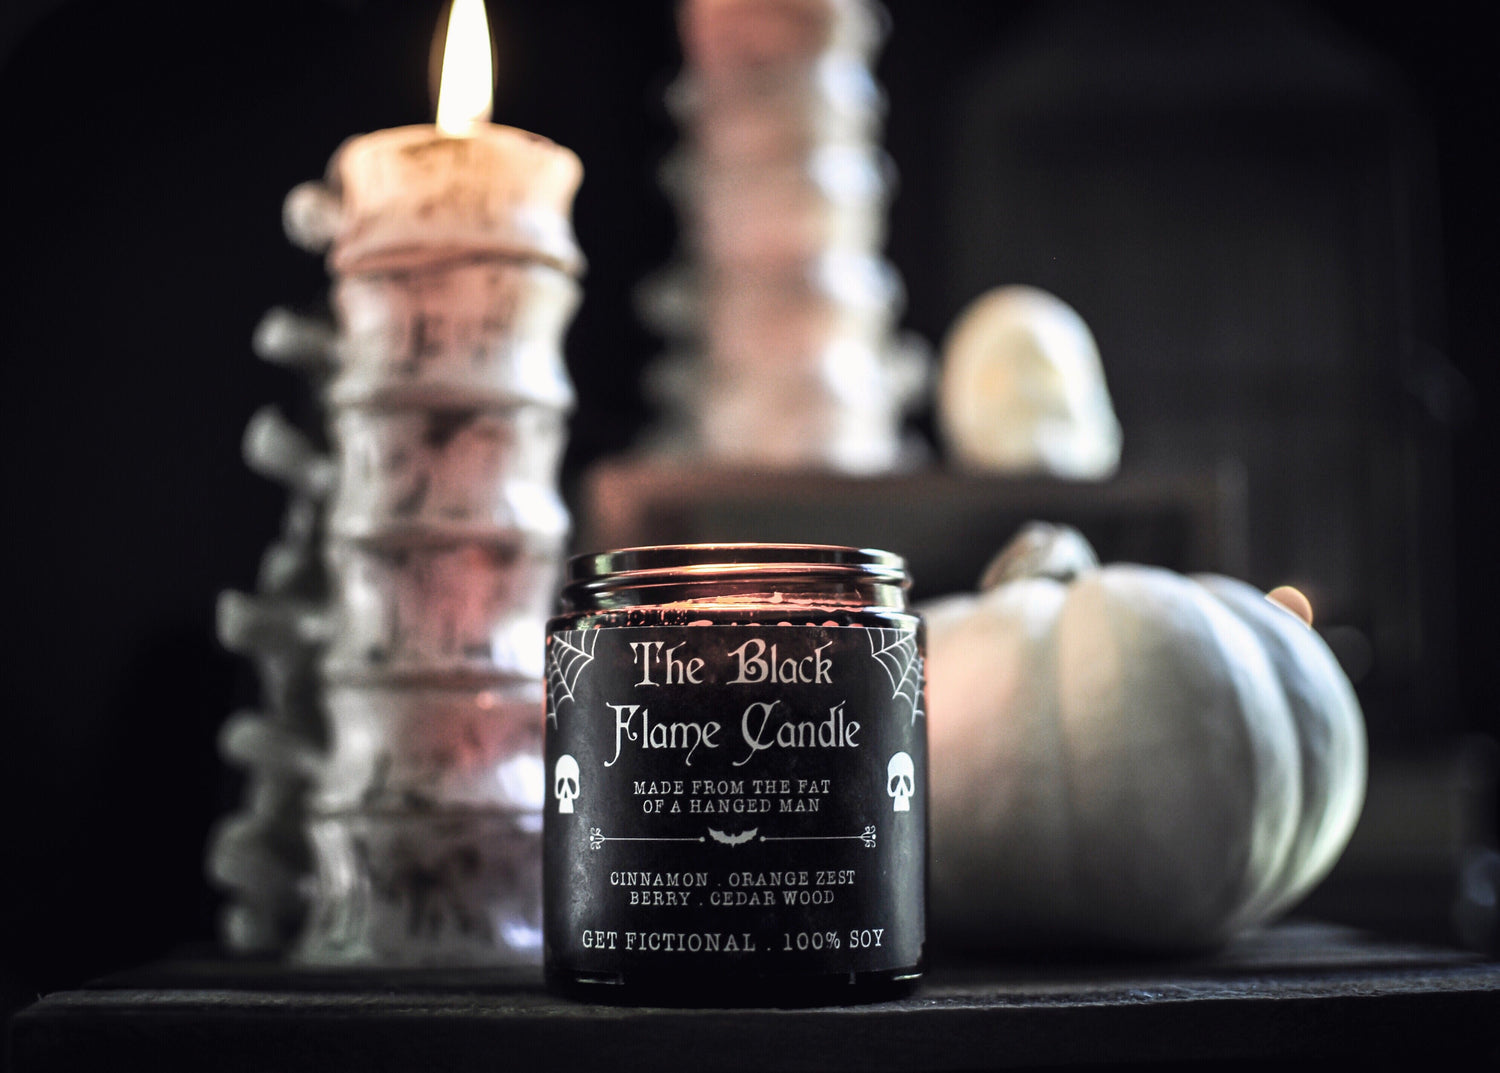 The Black Flame Candle